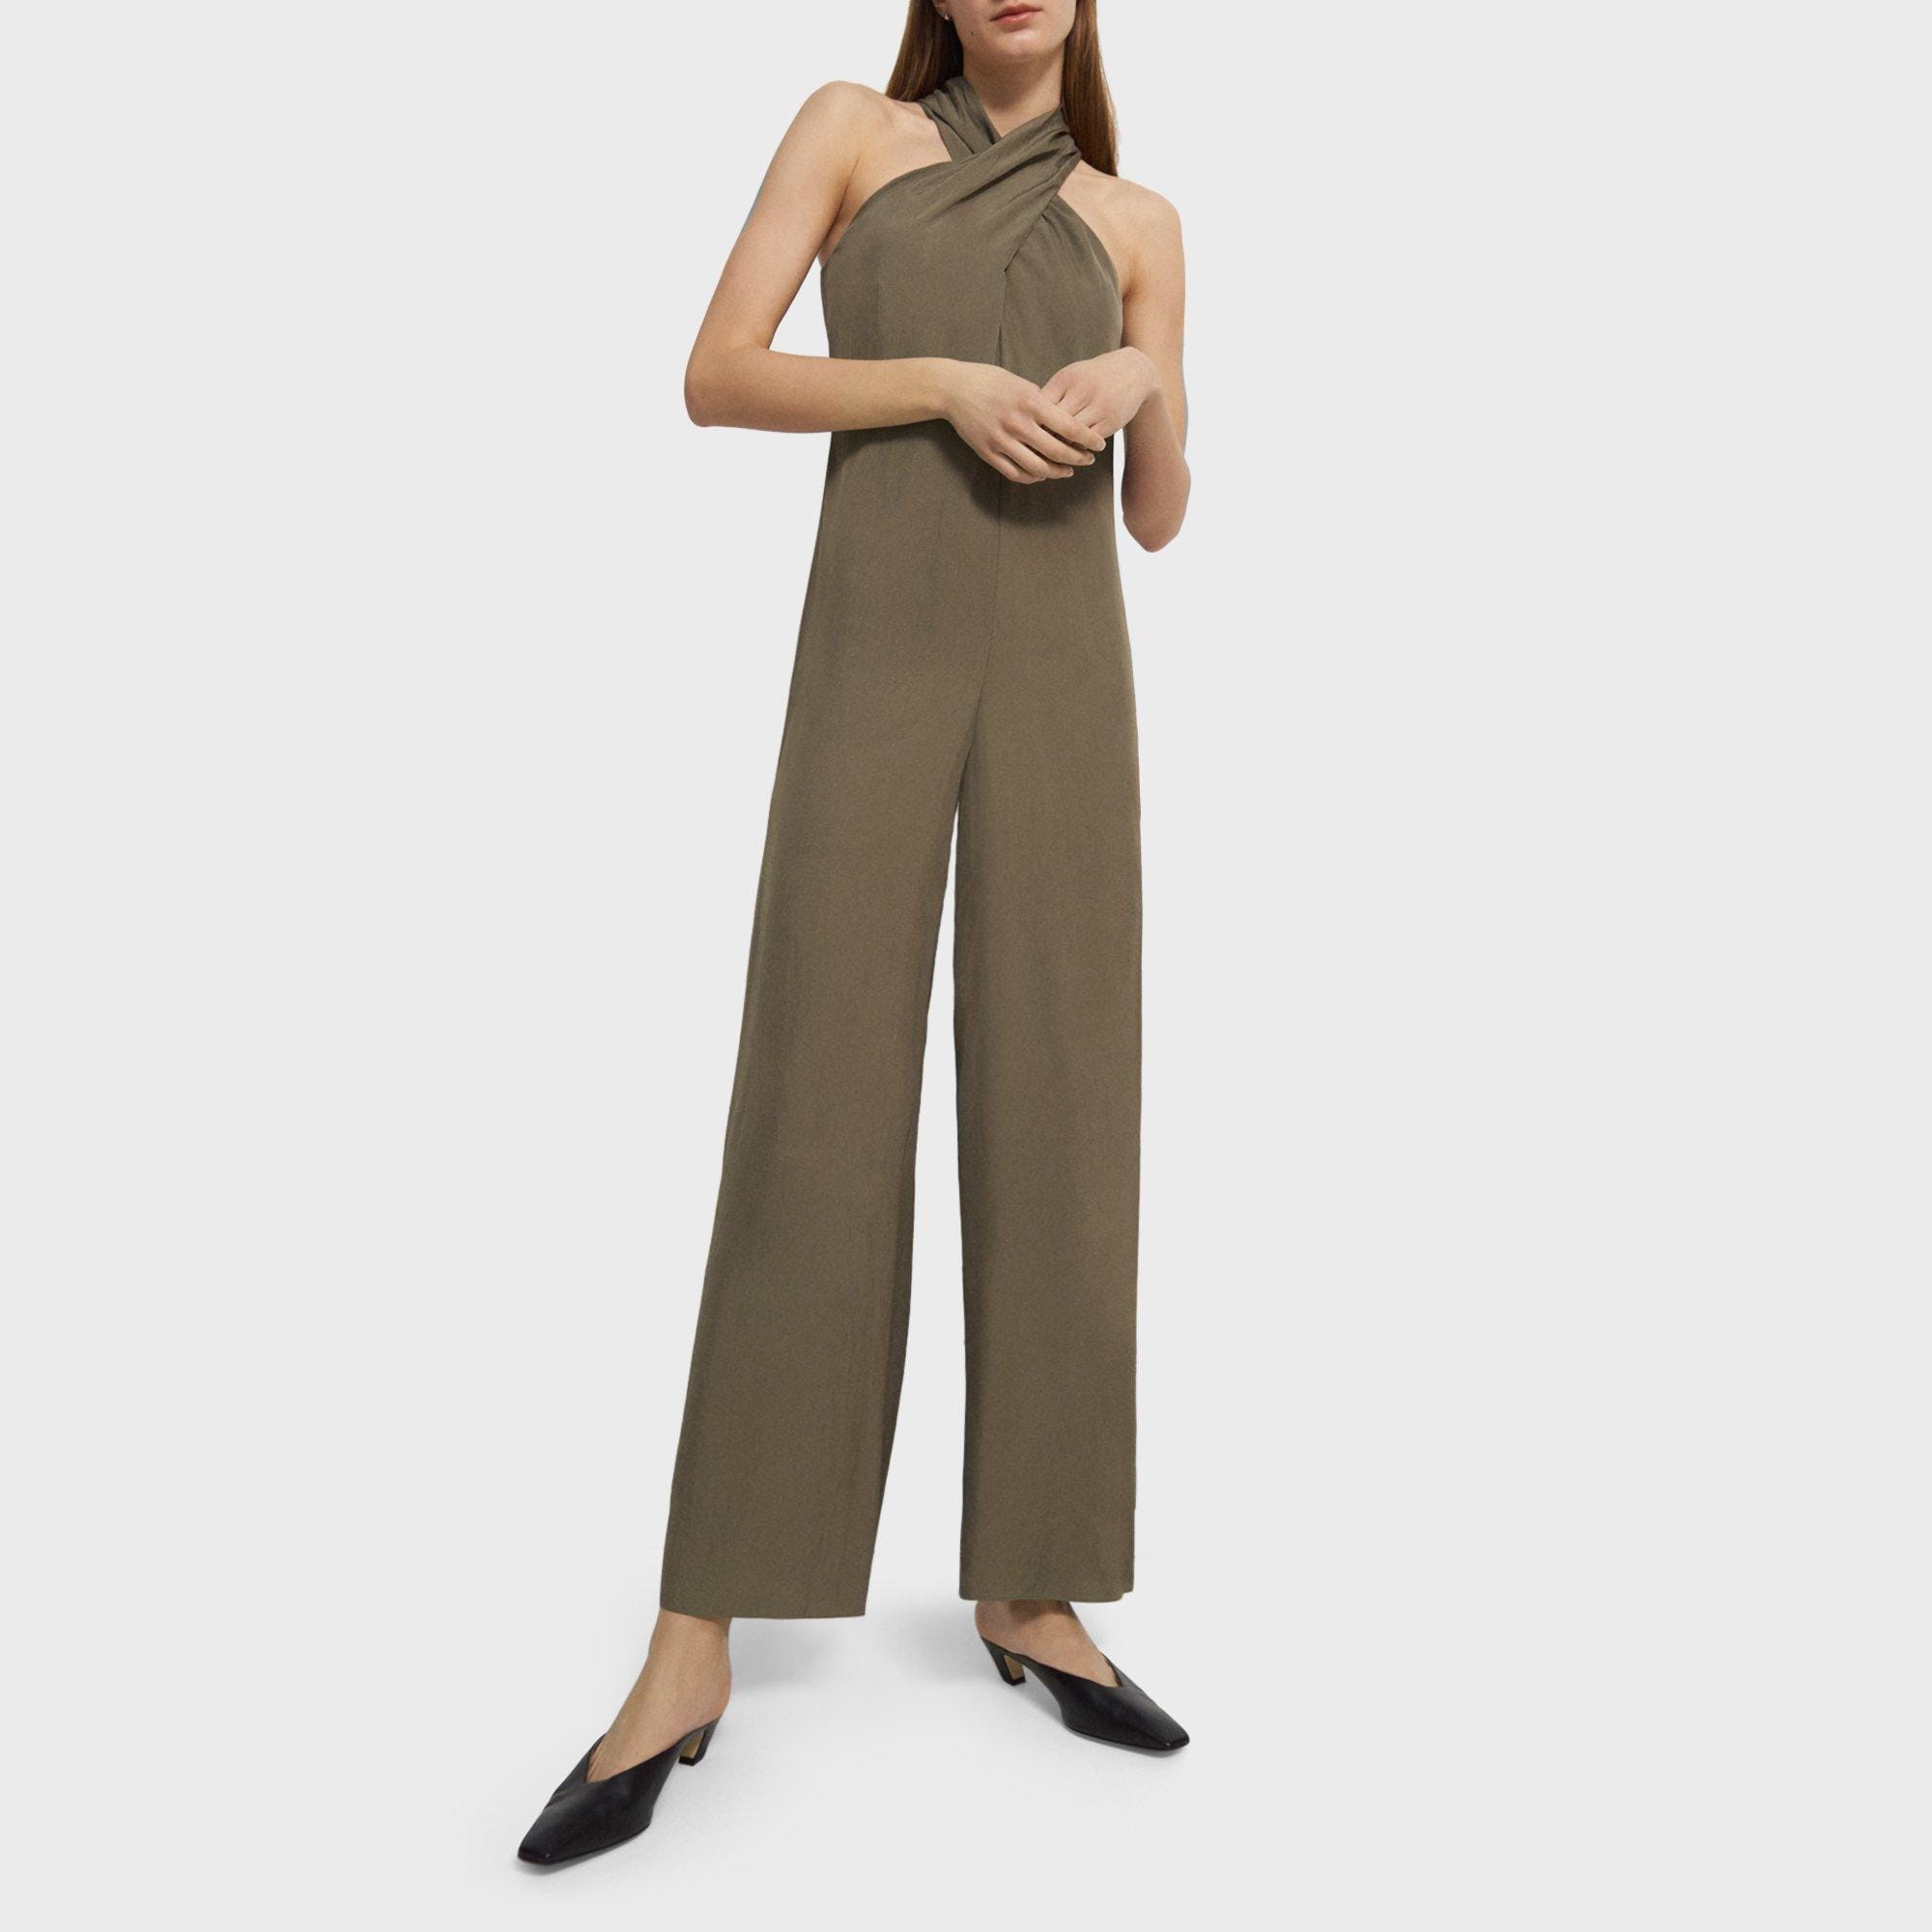 Theory Sleeveless Halter Jumpsuit in Washed Twill